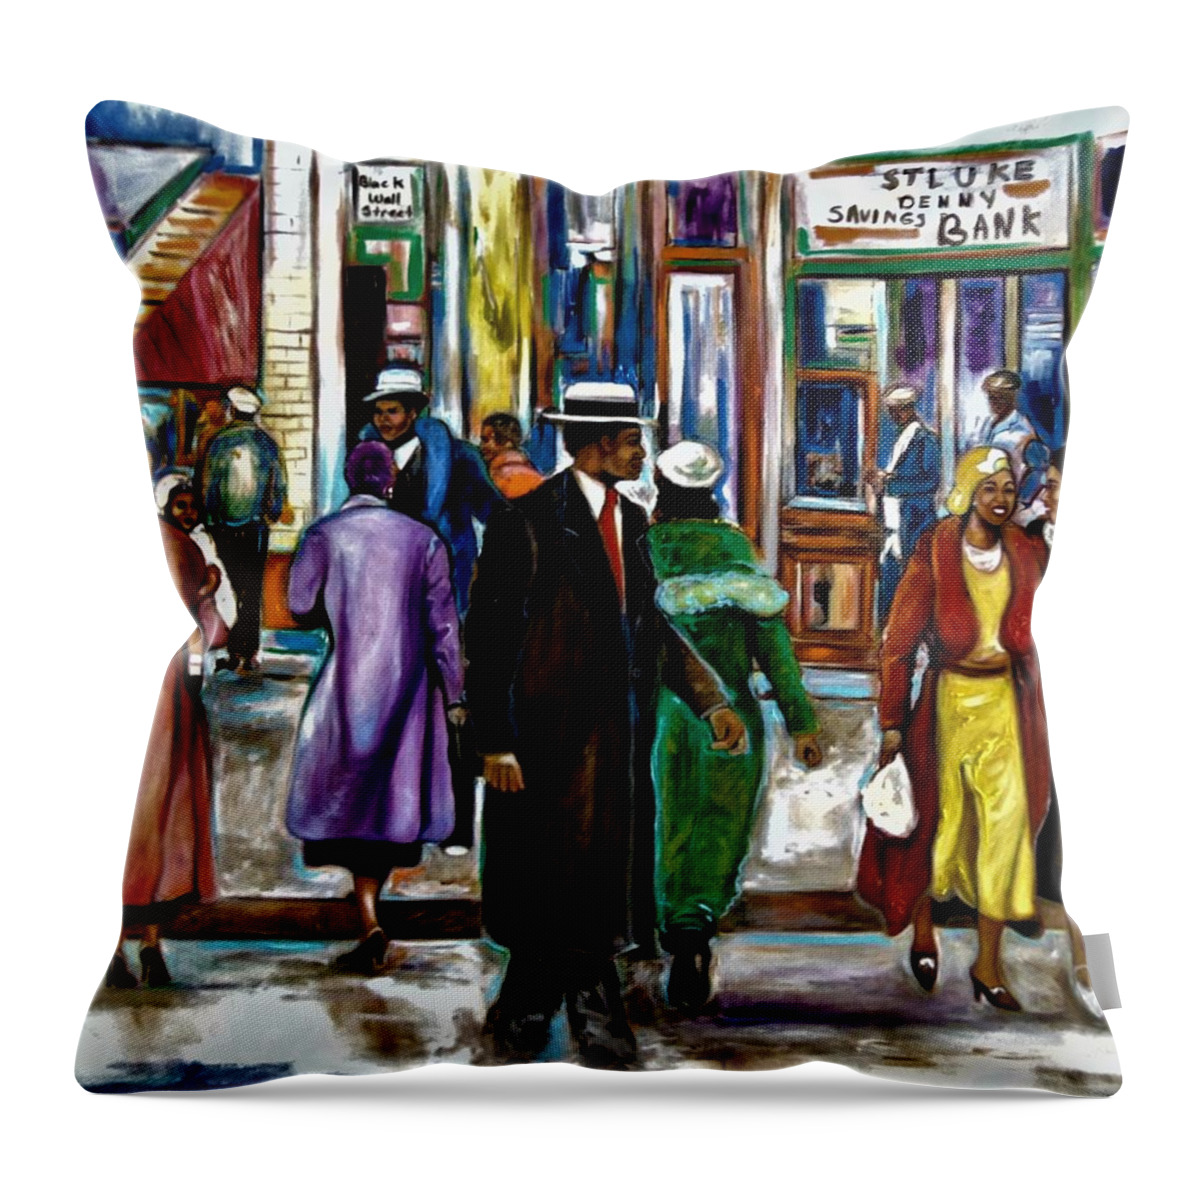 Black Art Throw Pillow featuring the painting Histor Of Black Wall Street by Emery Franklin